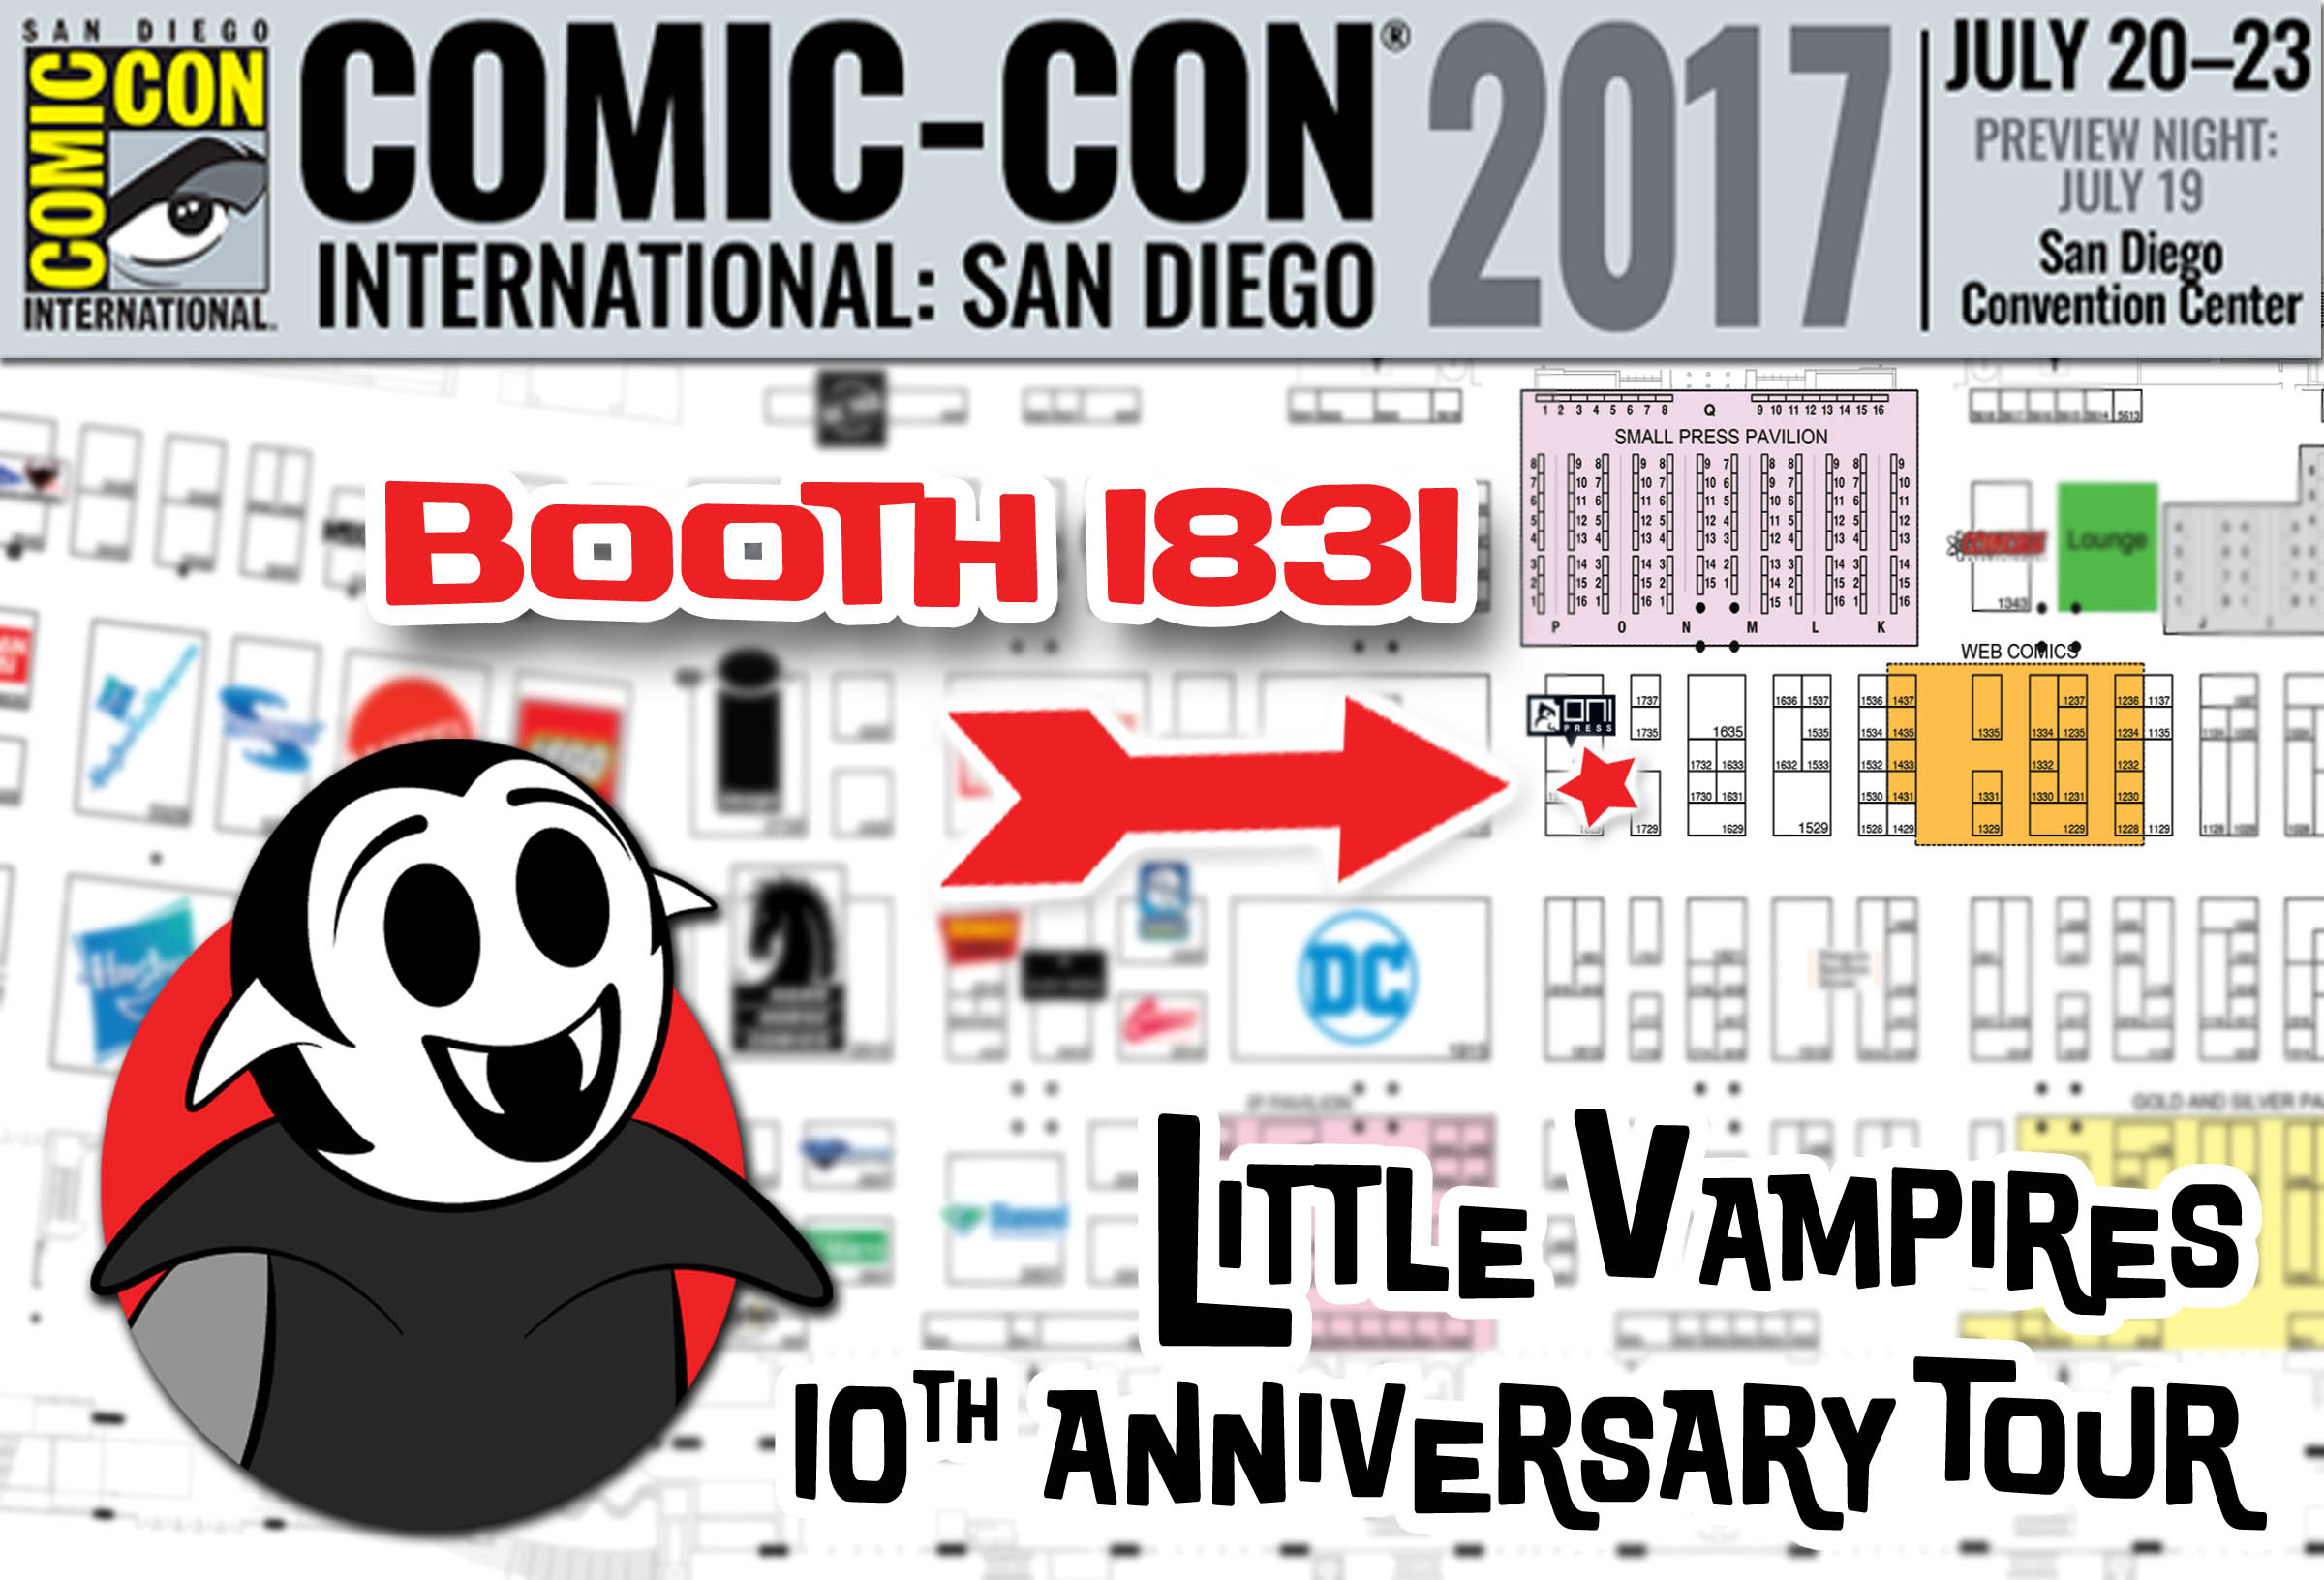 San Diego Comic-Con 2017 exhibitor floor map with the Little Vampires booth highlighted